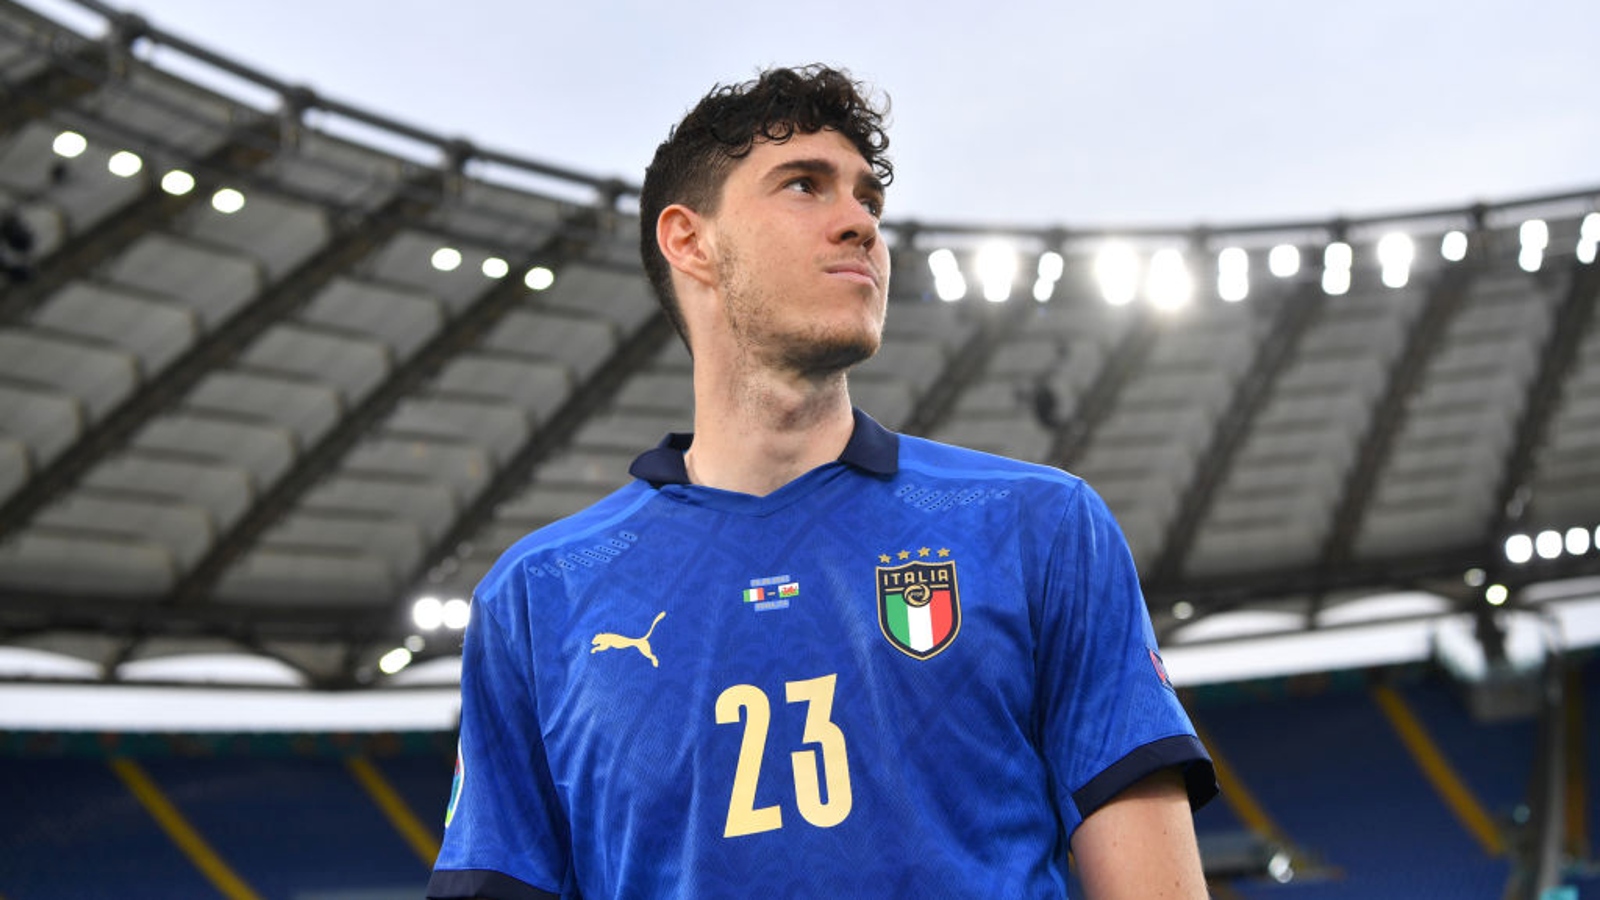 Can Bastoni be Chiellini's heir for Italy? | Opinion | The Inter Way